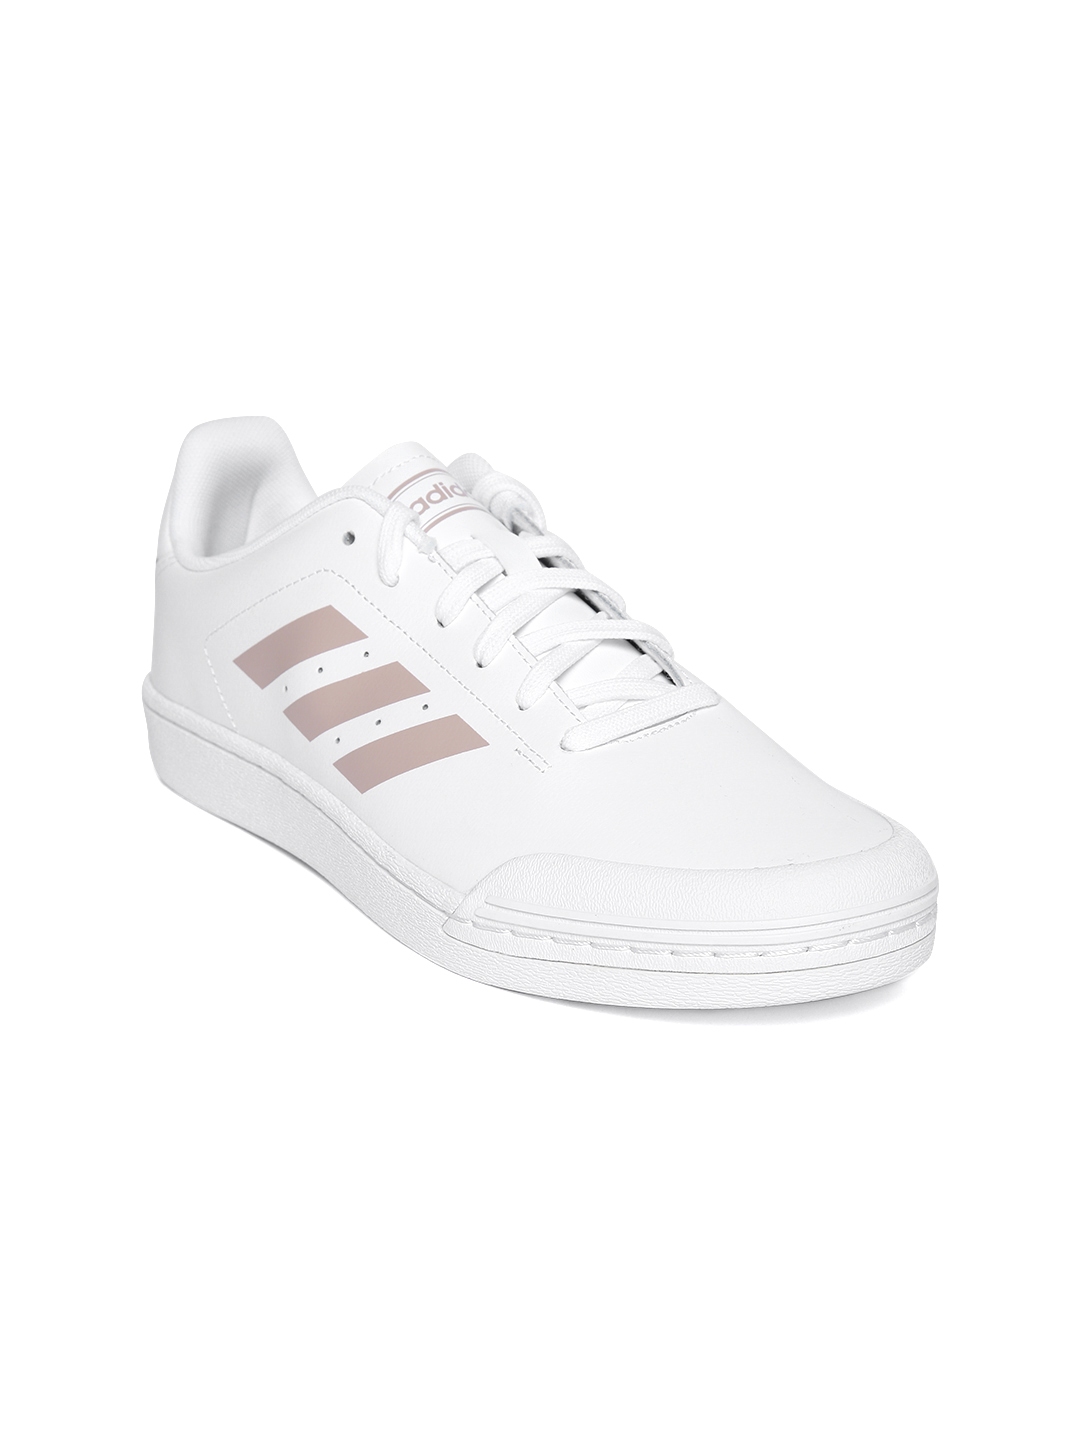 adidas court 70s shoes